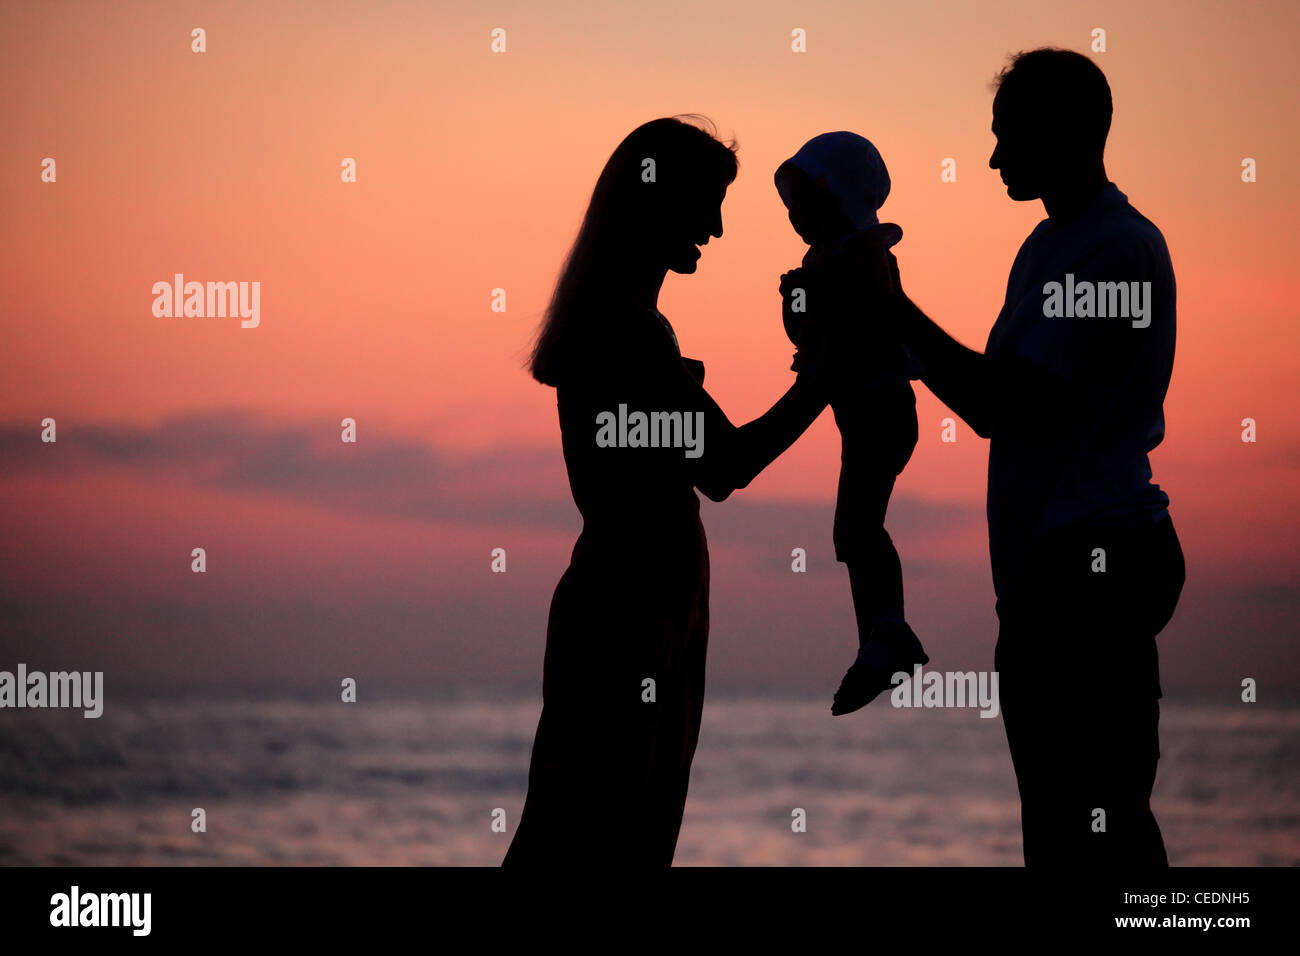 Silhouettes of parents with child on hands against  sea decline Stock Photo